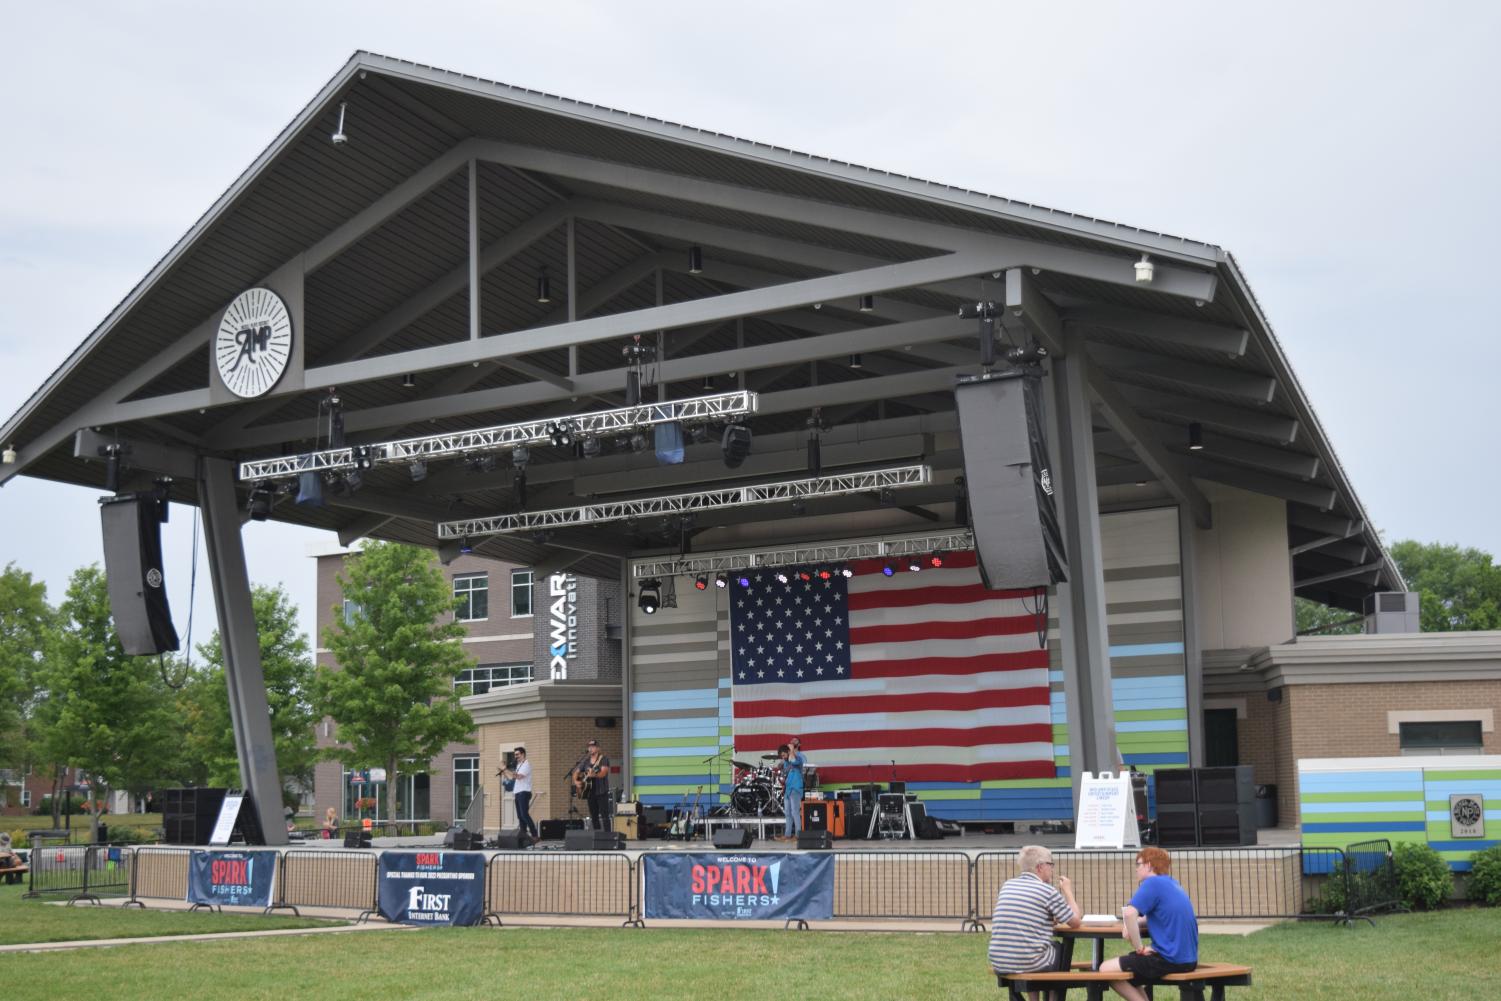 Live entertainment at the Nickel Plate District Amphitheater stage on Saturday, June 25. Visitors could enjoy the live music on the stage as they looked through the street fair.